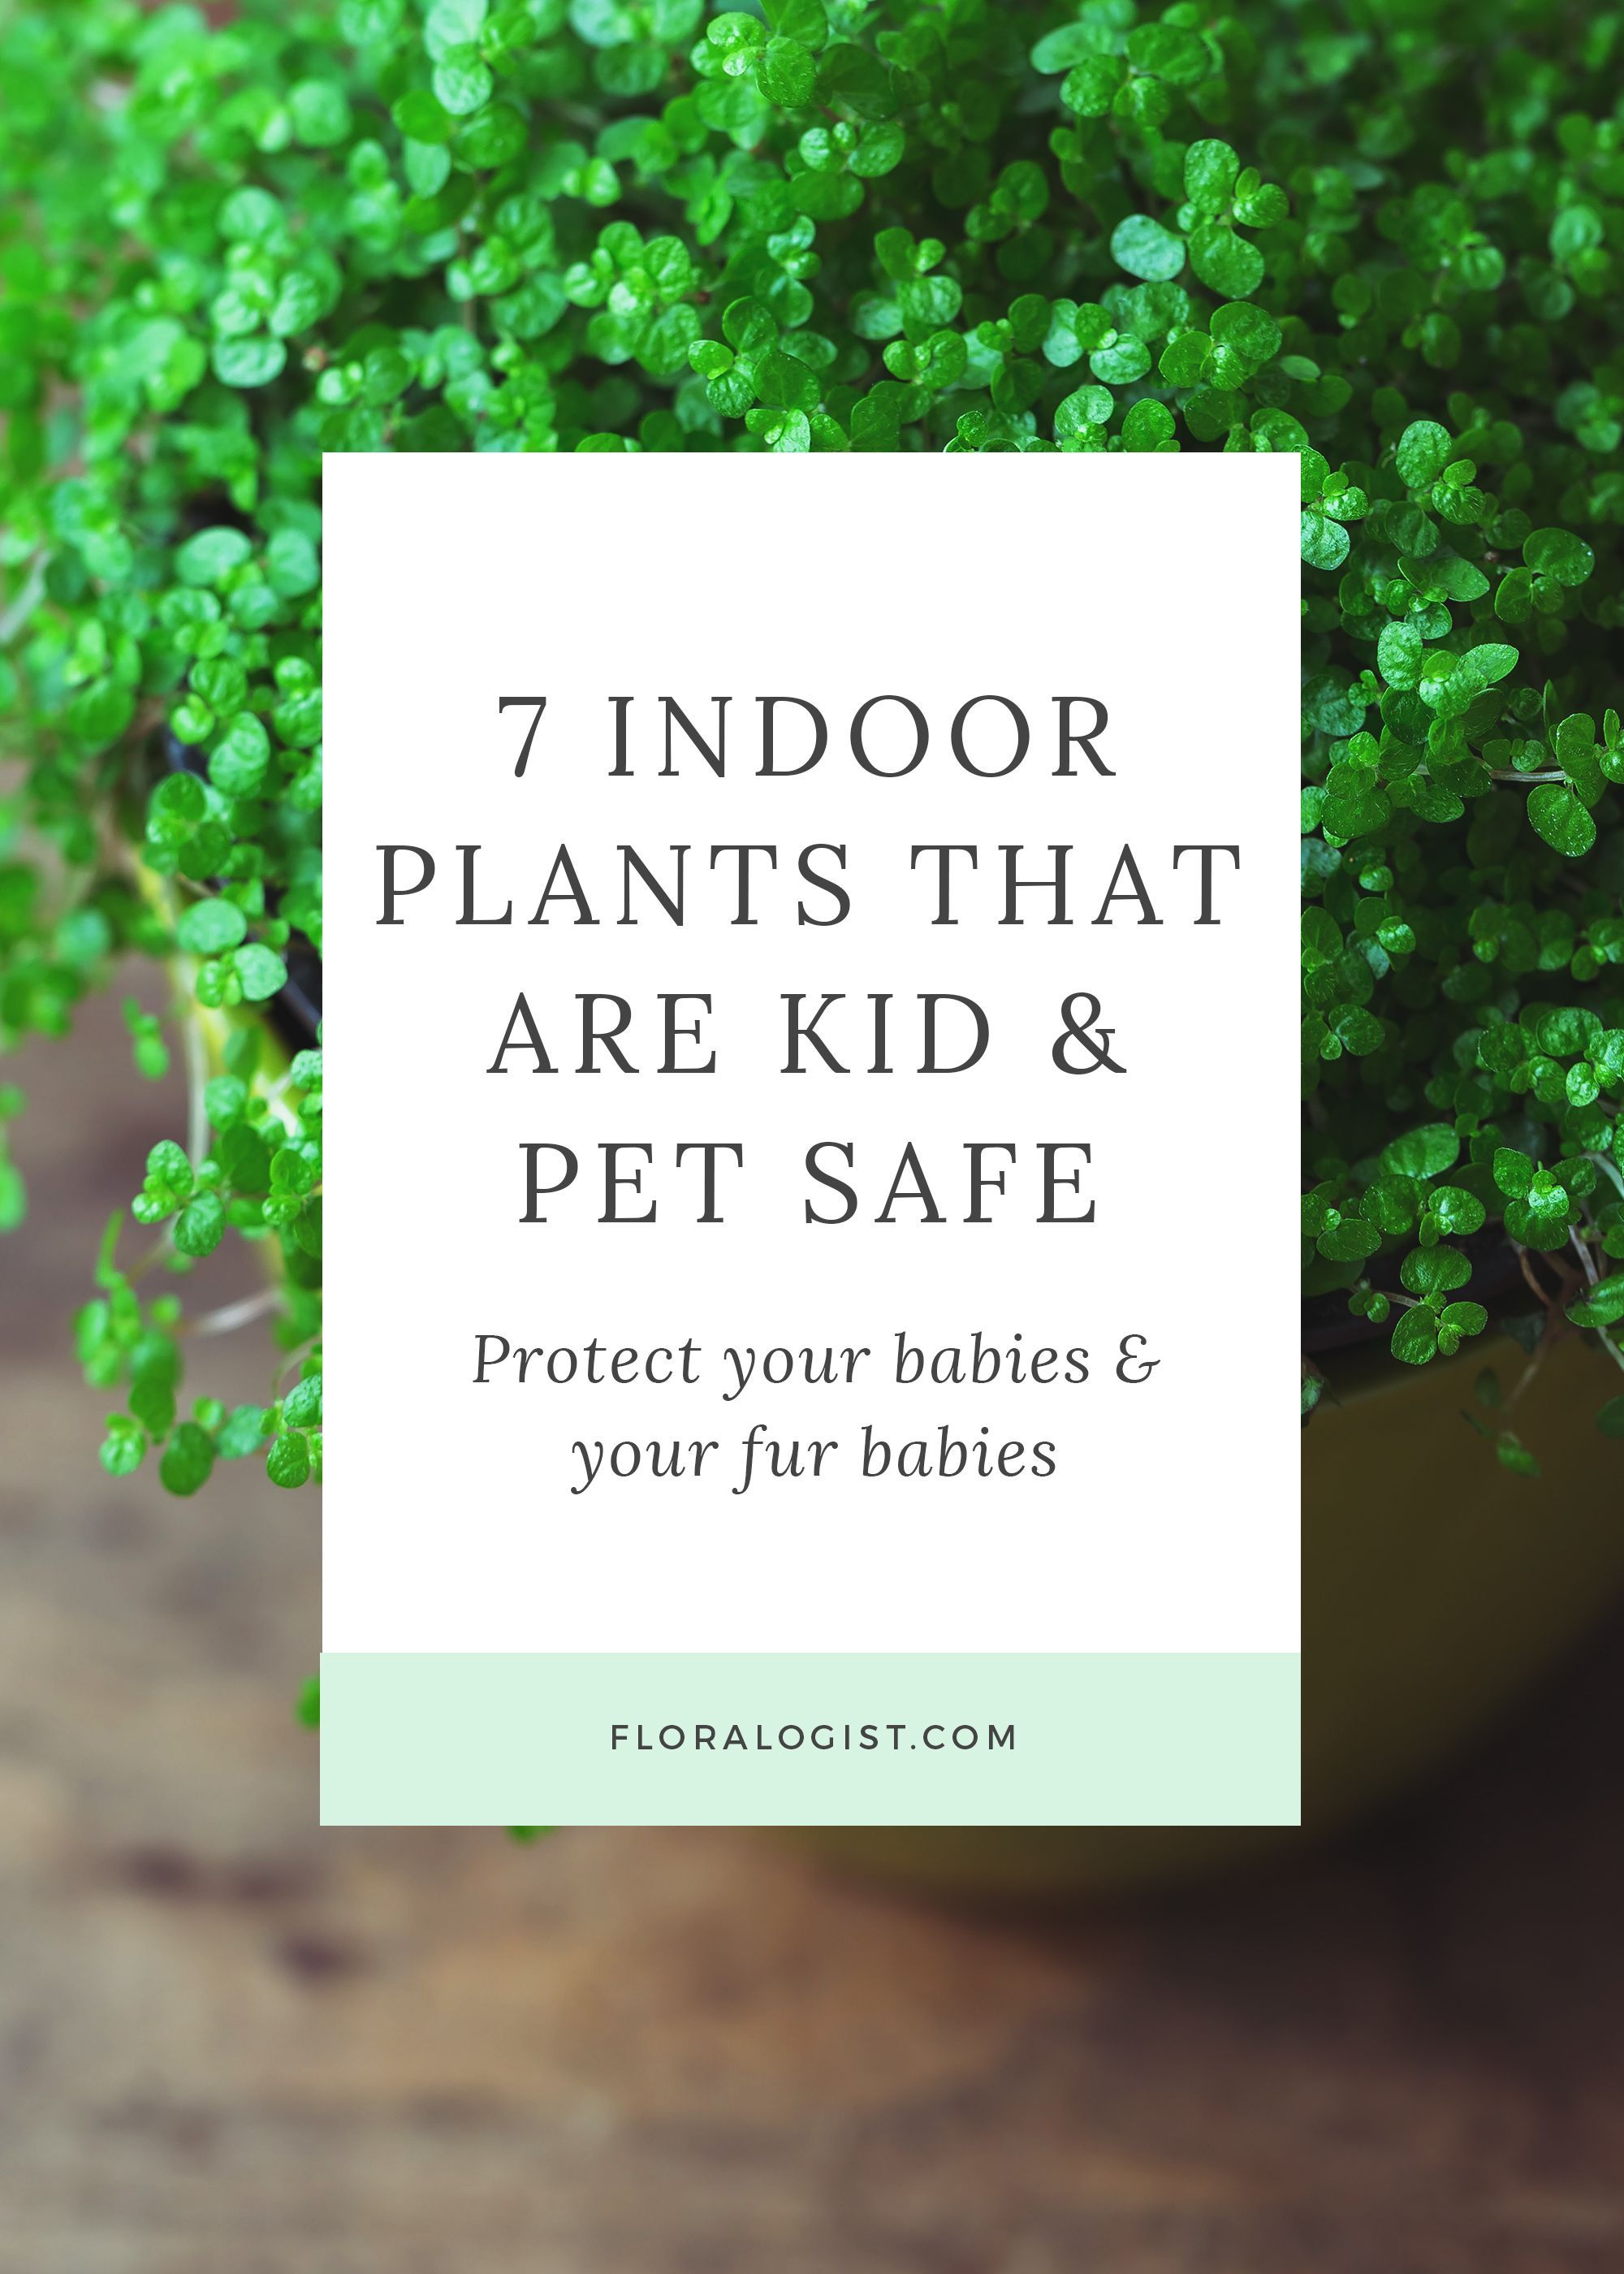 7 Indoor Plants That Are Kids & Pet Safe -   18 plants Green outdoors ideas